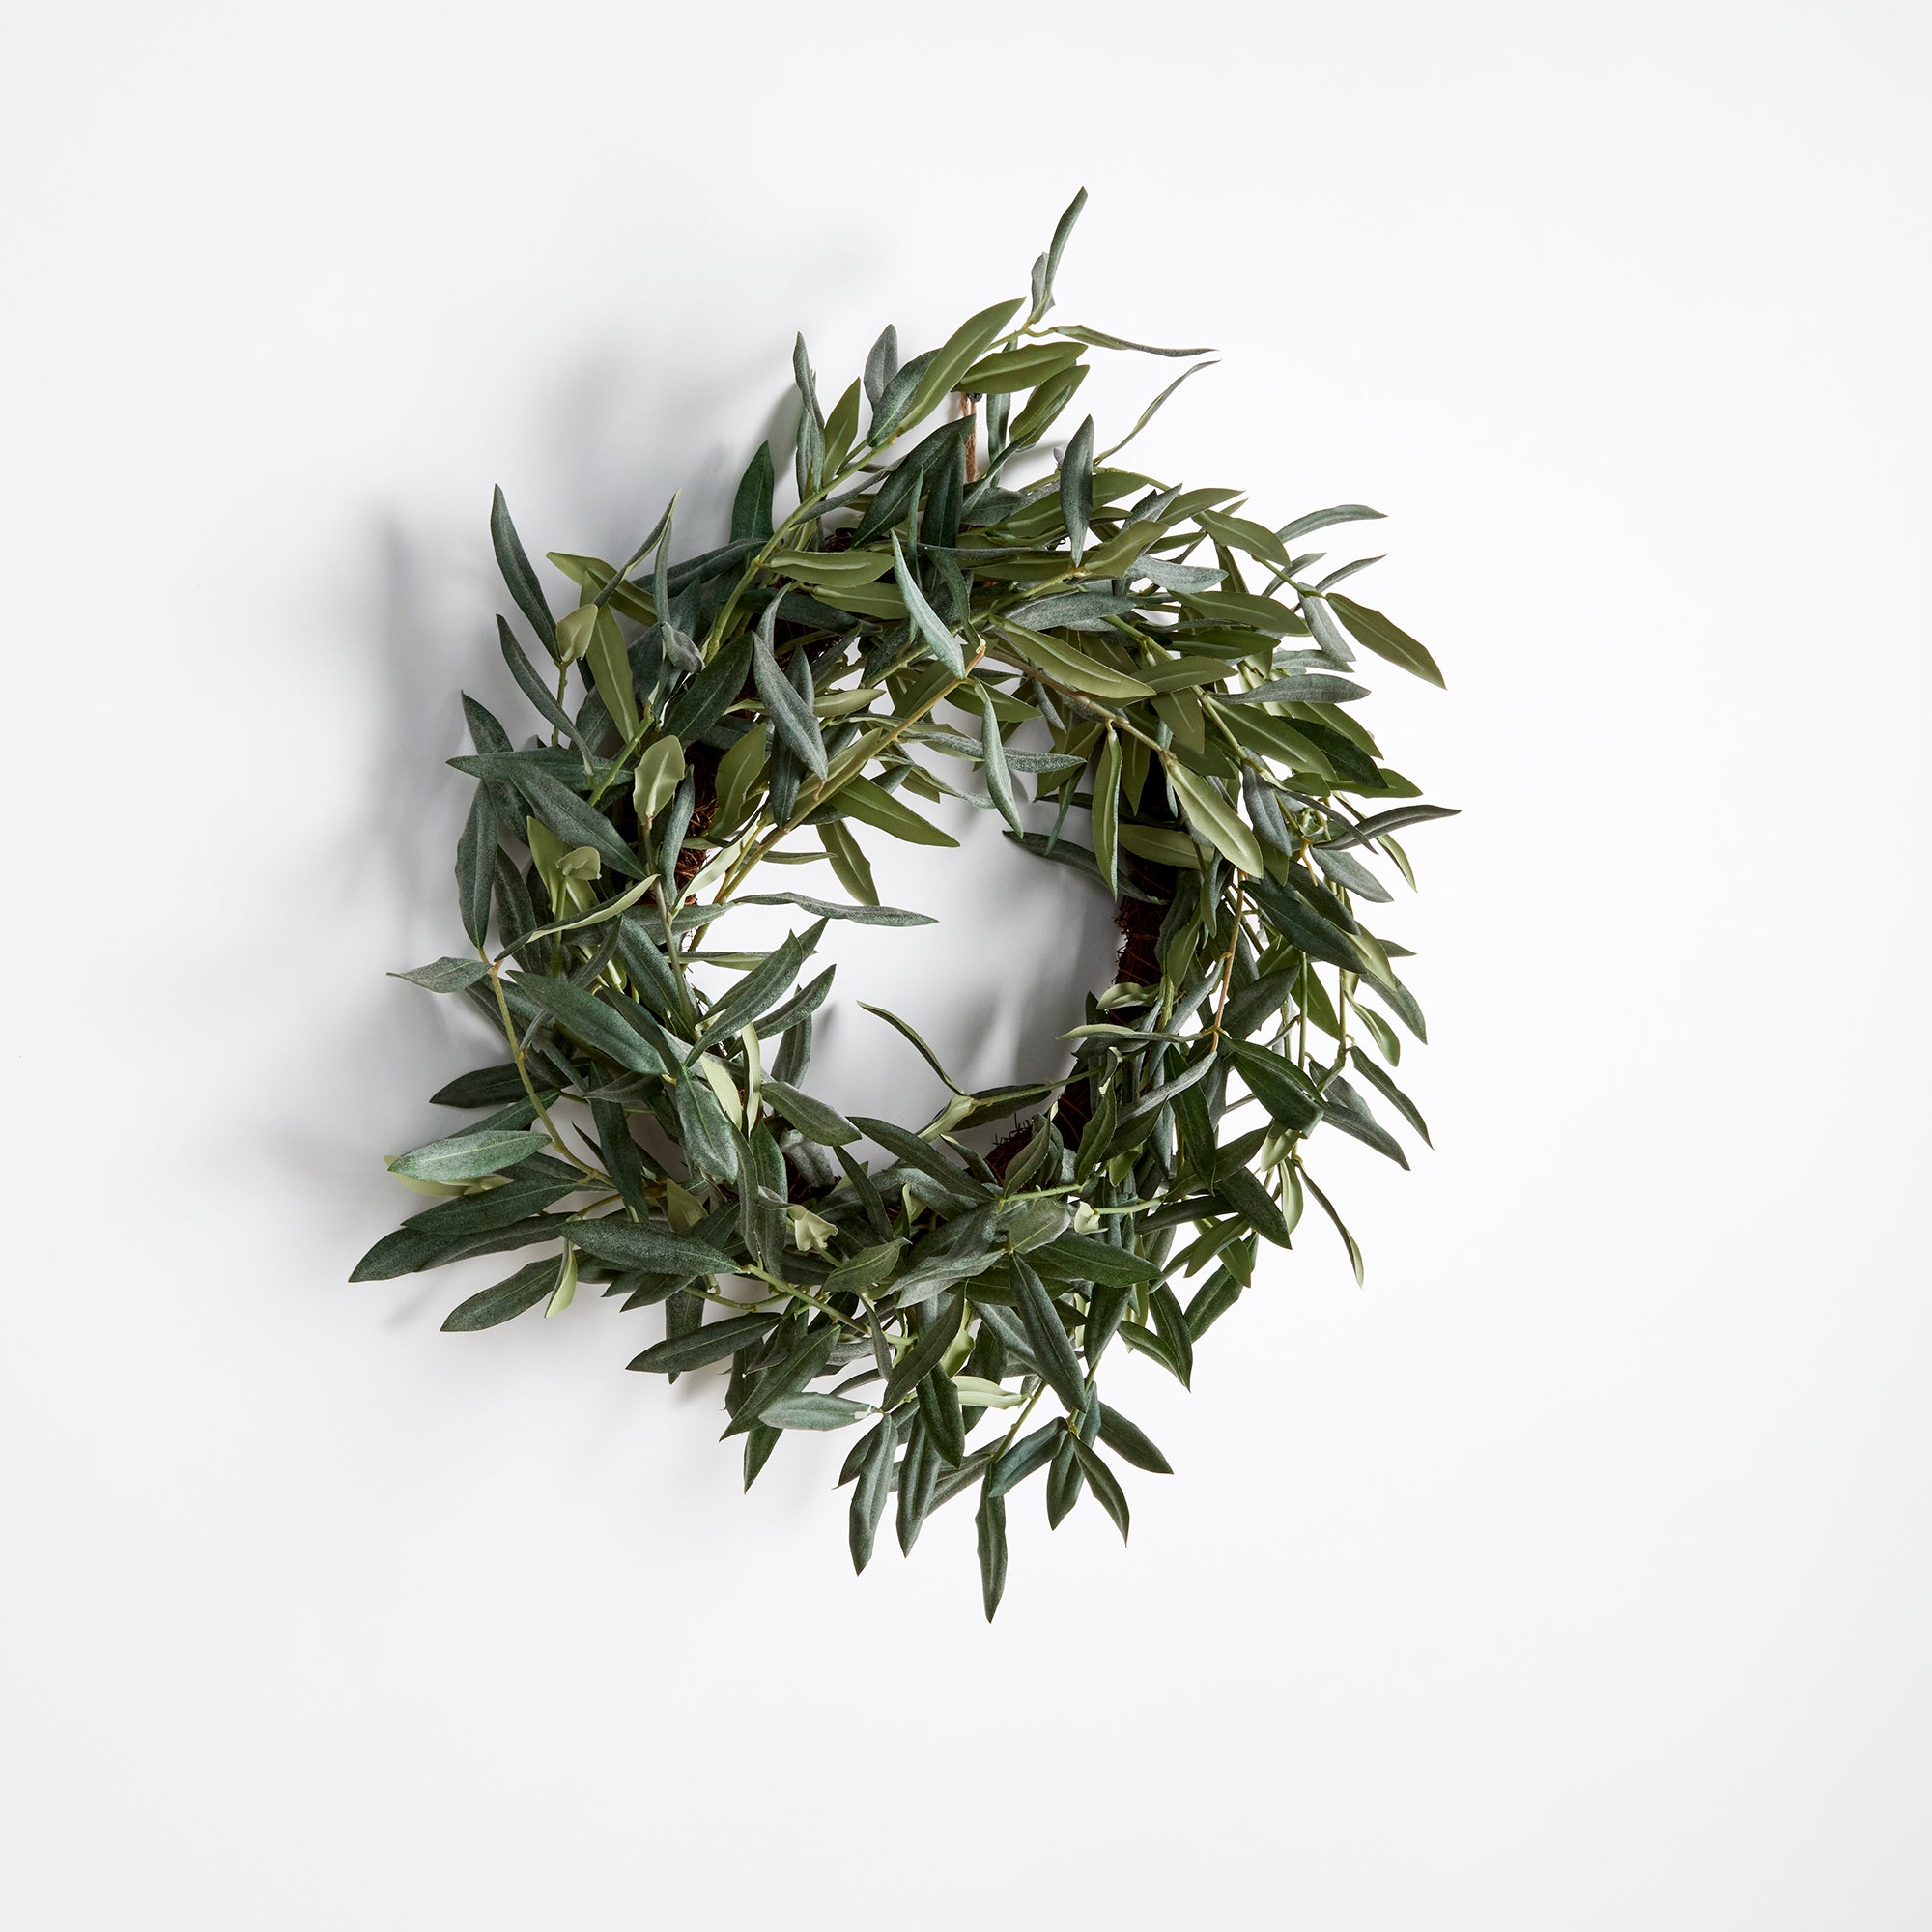 This olive wreath is a charming addition to any space needing a touch of warmth. Distinctive and refined, it's no wonder this Mediterranean beauty has stood the test of time. Comes complete with a twine loop for easy hanging. Use as a candle centerpiece on a table or hang on an interior door. Amethyst Home provides interior design, new construction, custom furniture, and area rugs in the Alpharetta metro area.